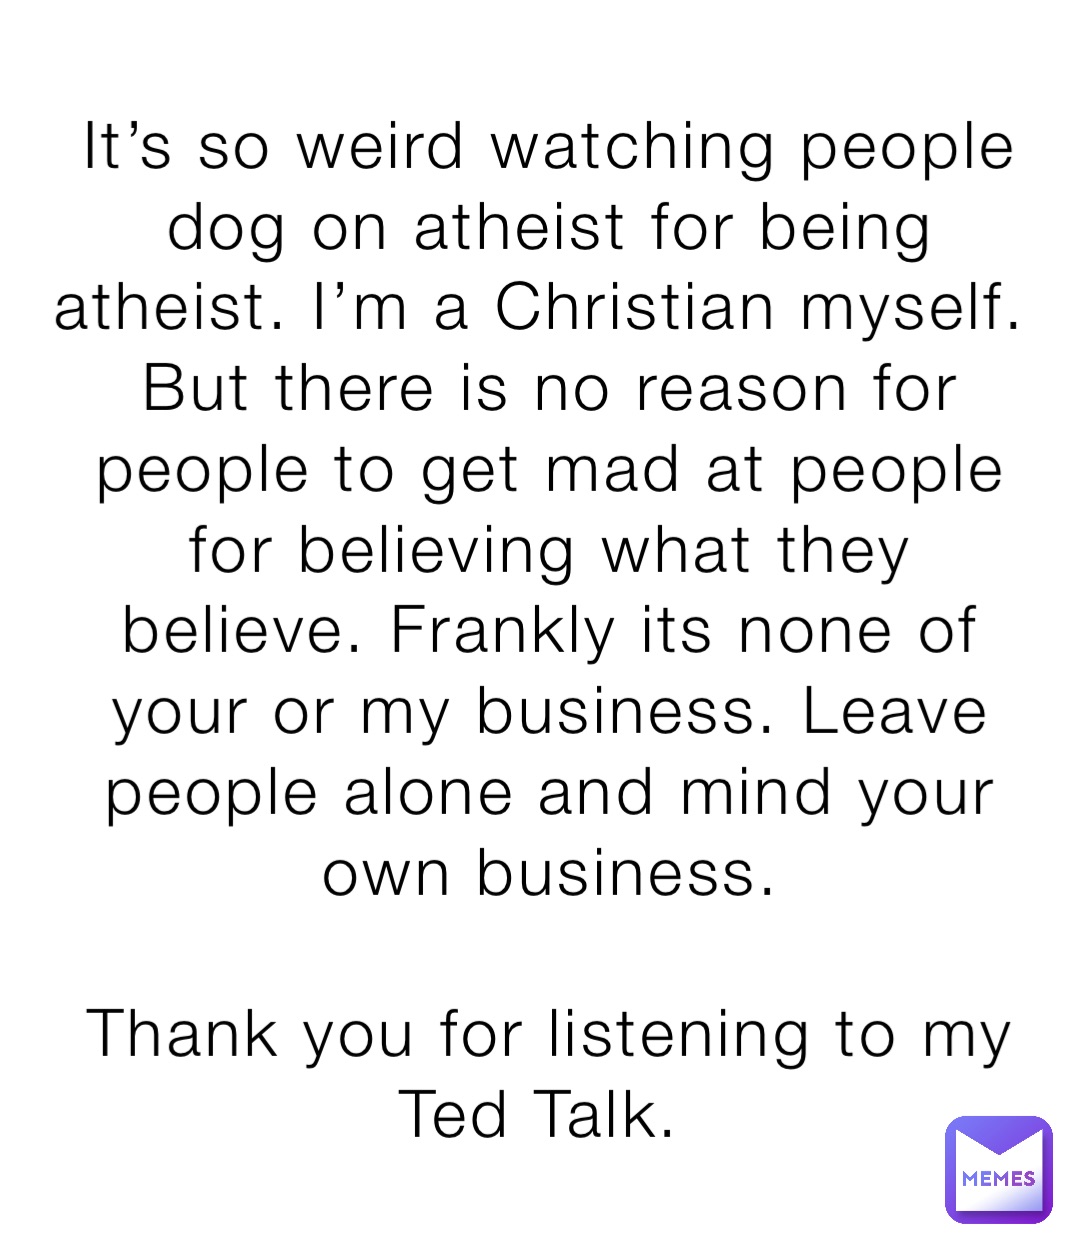 It’s so weird watching people dog on atheist for being atheist. I’m a Christian myself. But there is no reason for people to get mad at people for believing what they believe. Frankly its none of your or my business. Leave people alone and mind your own business. 

Thank you for listening to my Ted Talk.